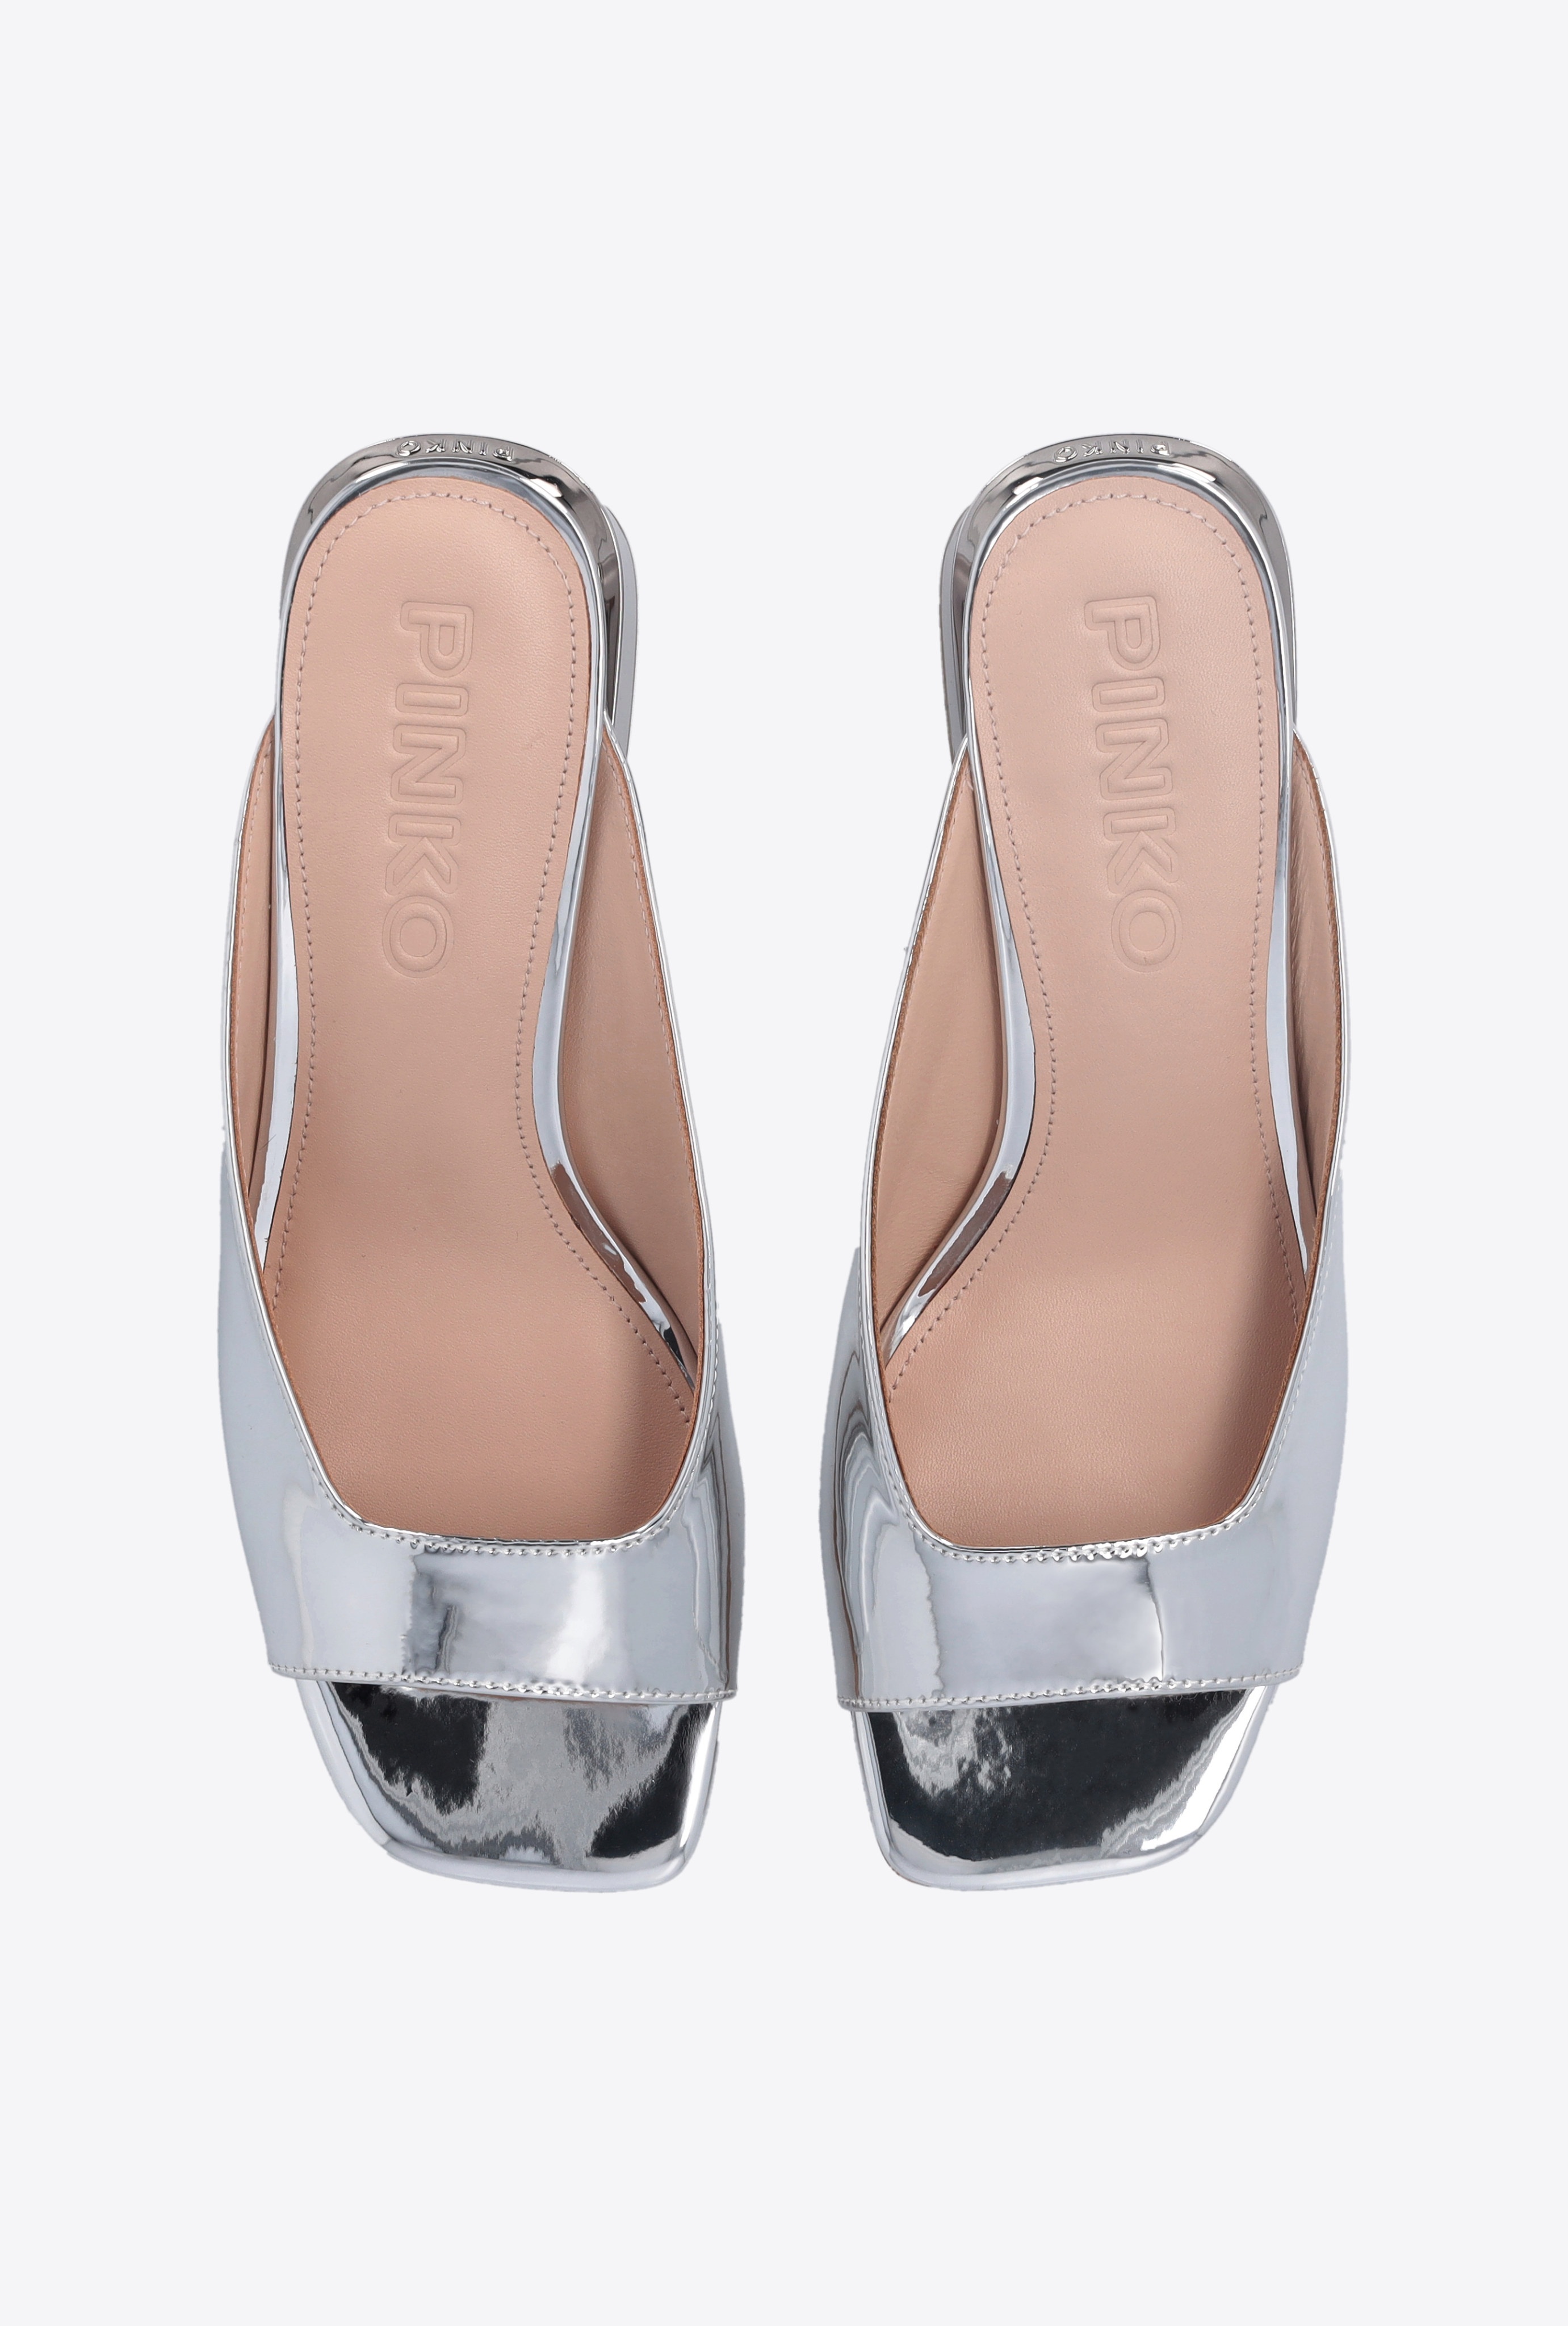 LAMINATED SLIP-ONS WITH SILVER HEEL - 8